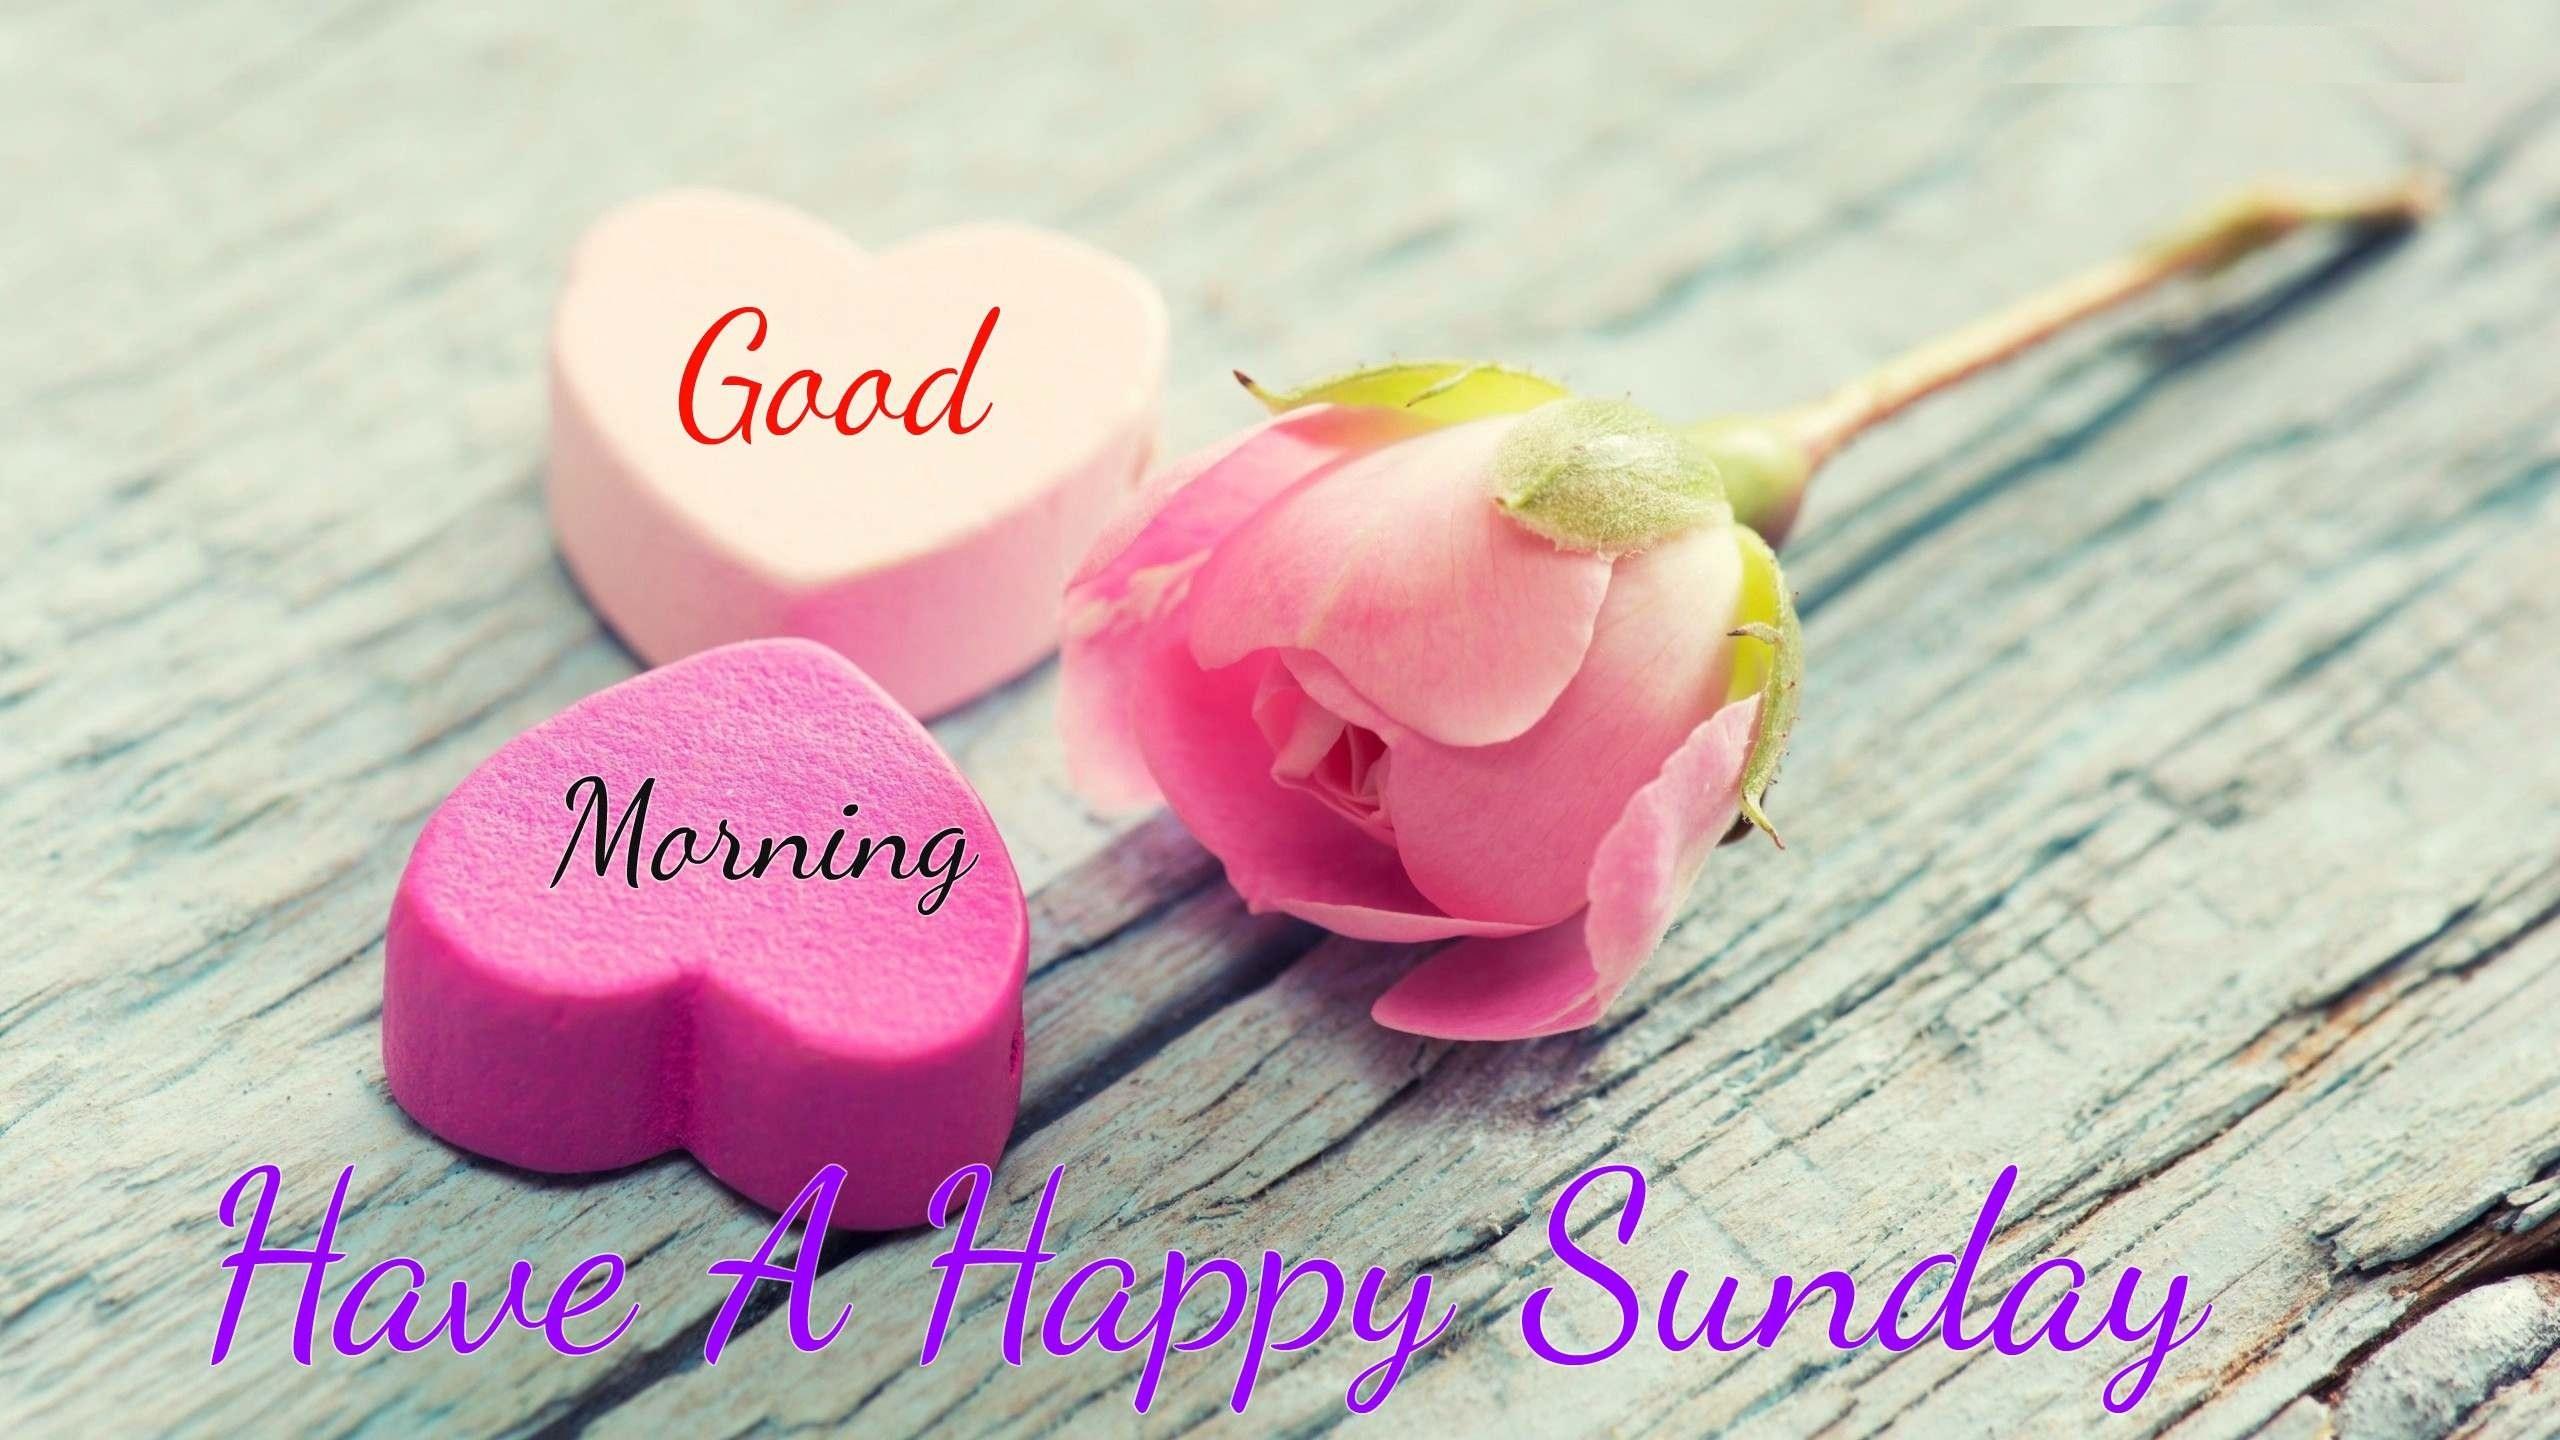 Happy Sunday Image Quotes and Greetings Love Image Wallpaper